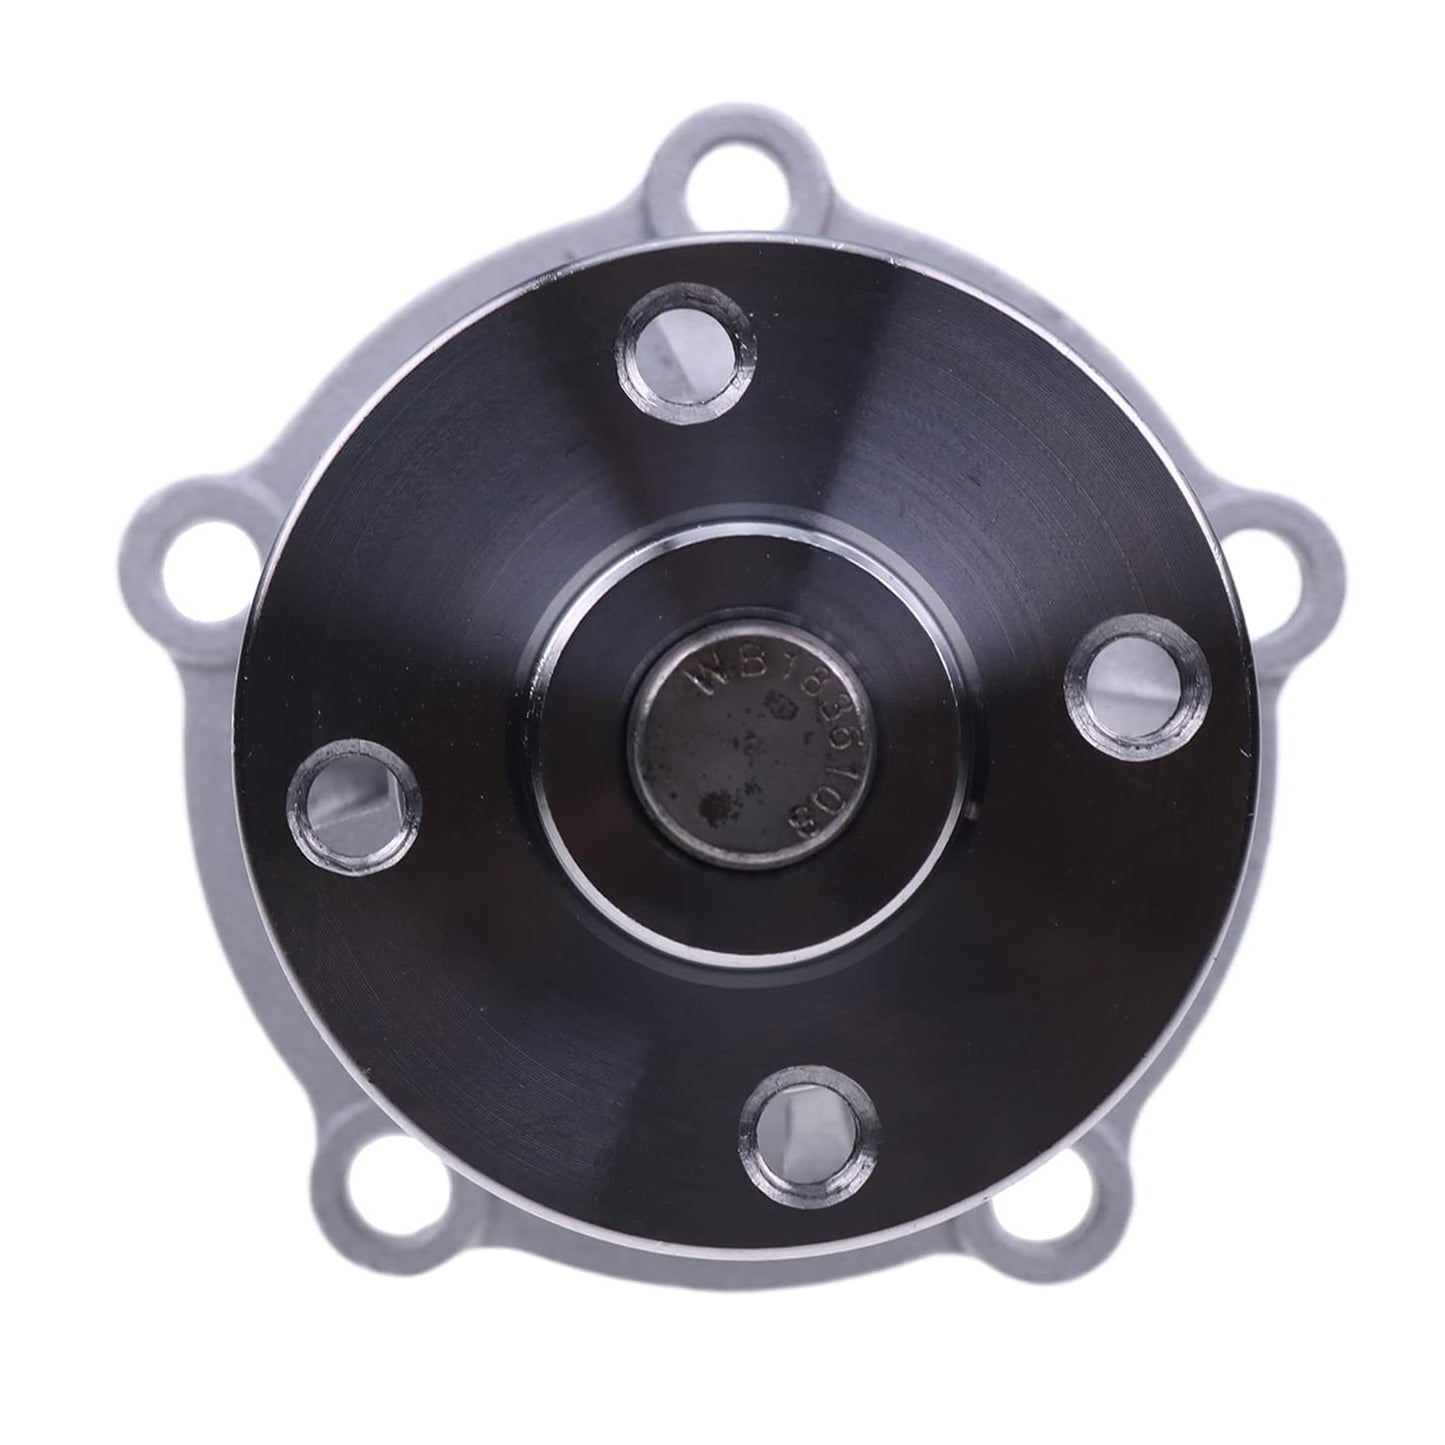 16120-78151-71 Water Pump Compatible With Toyota 4Y 5 and 6 Series Engine